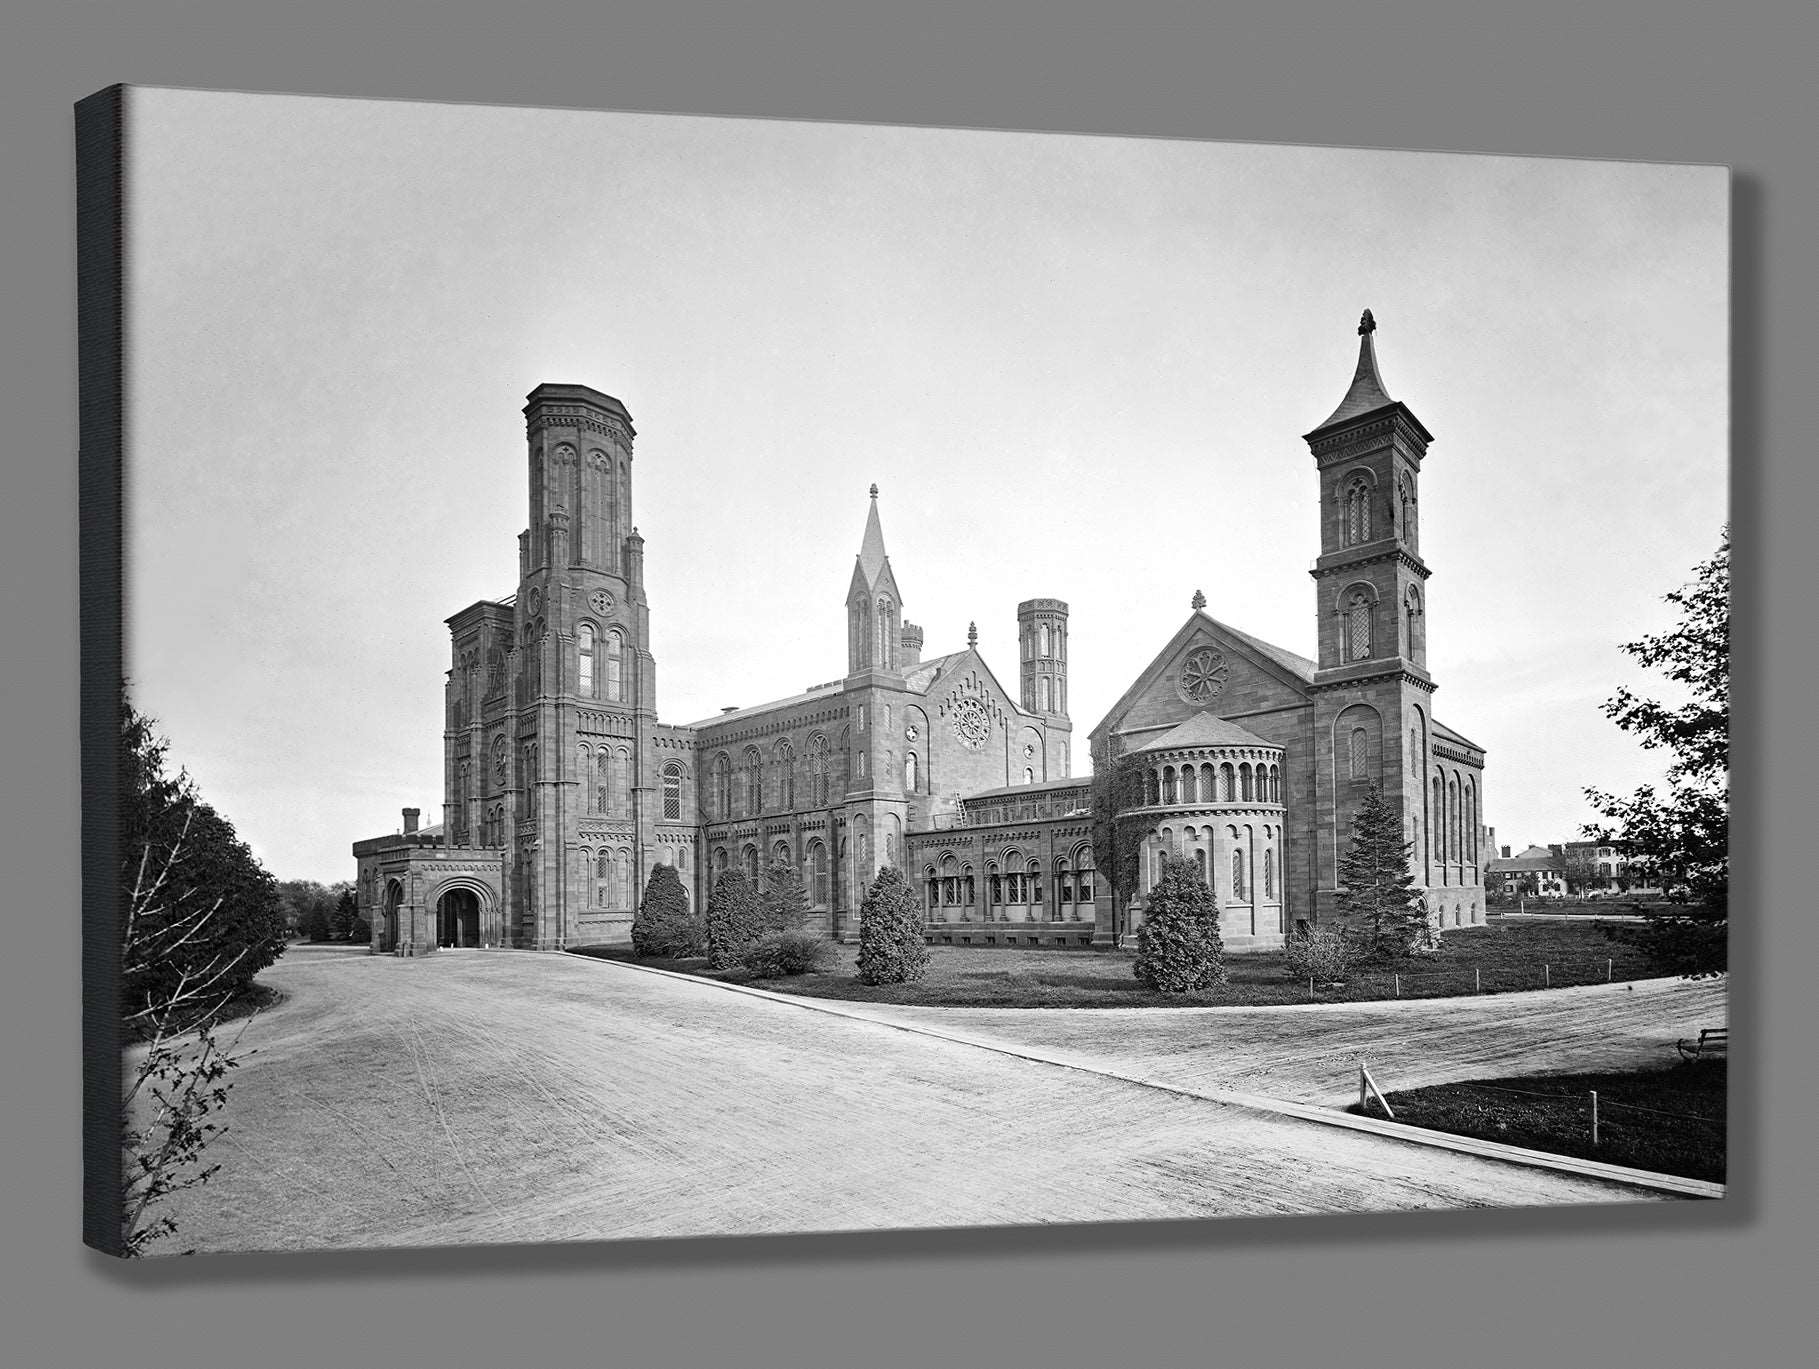 A canvas print reproduction of a photograph of the Smithsonian Institute